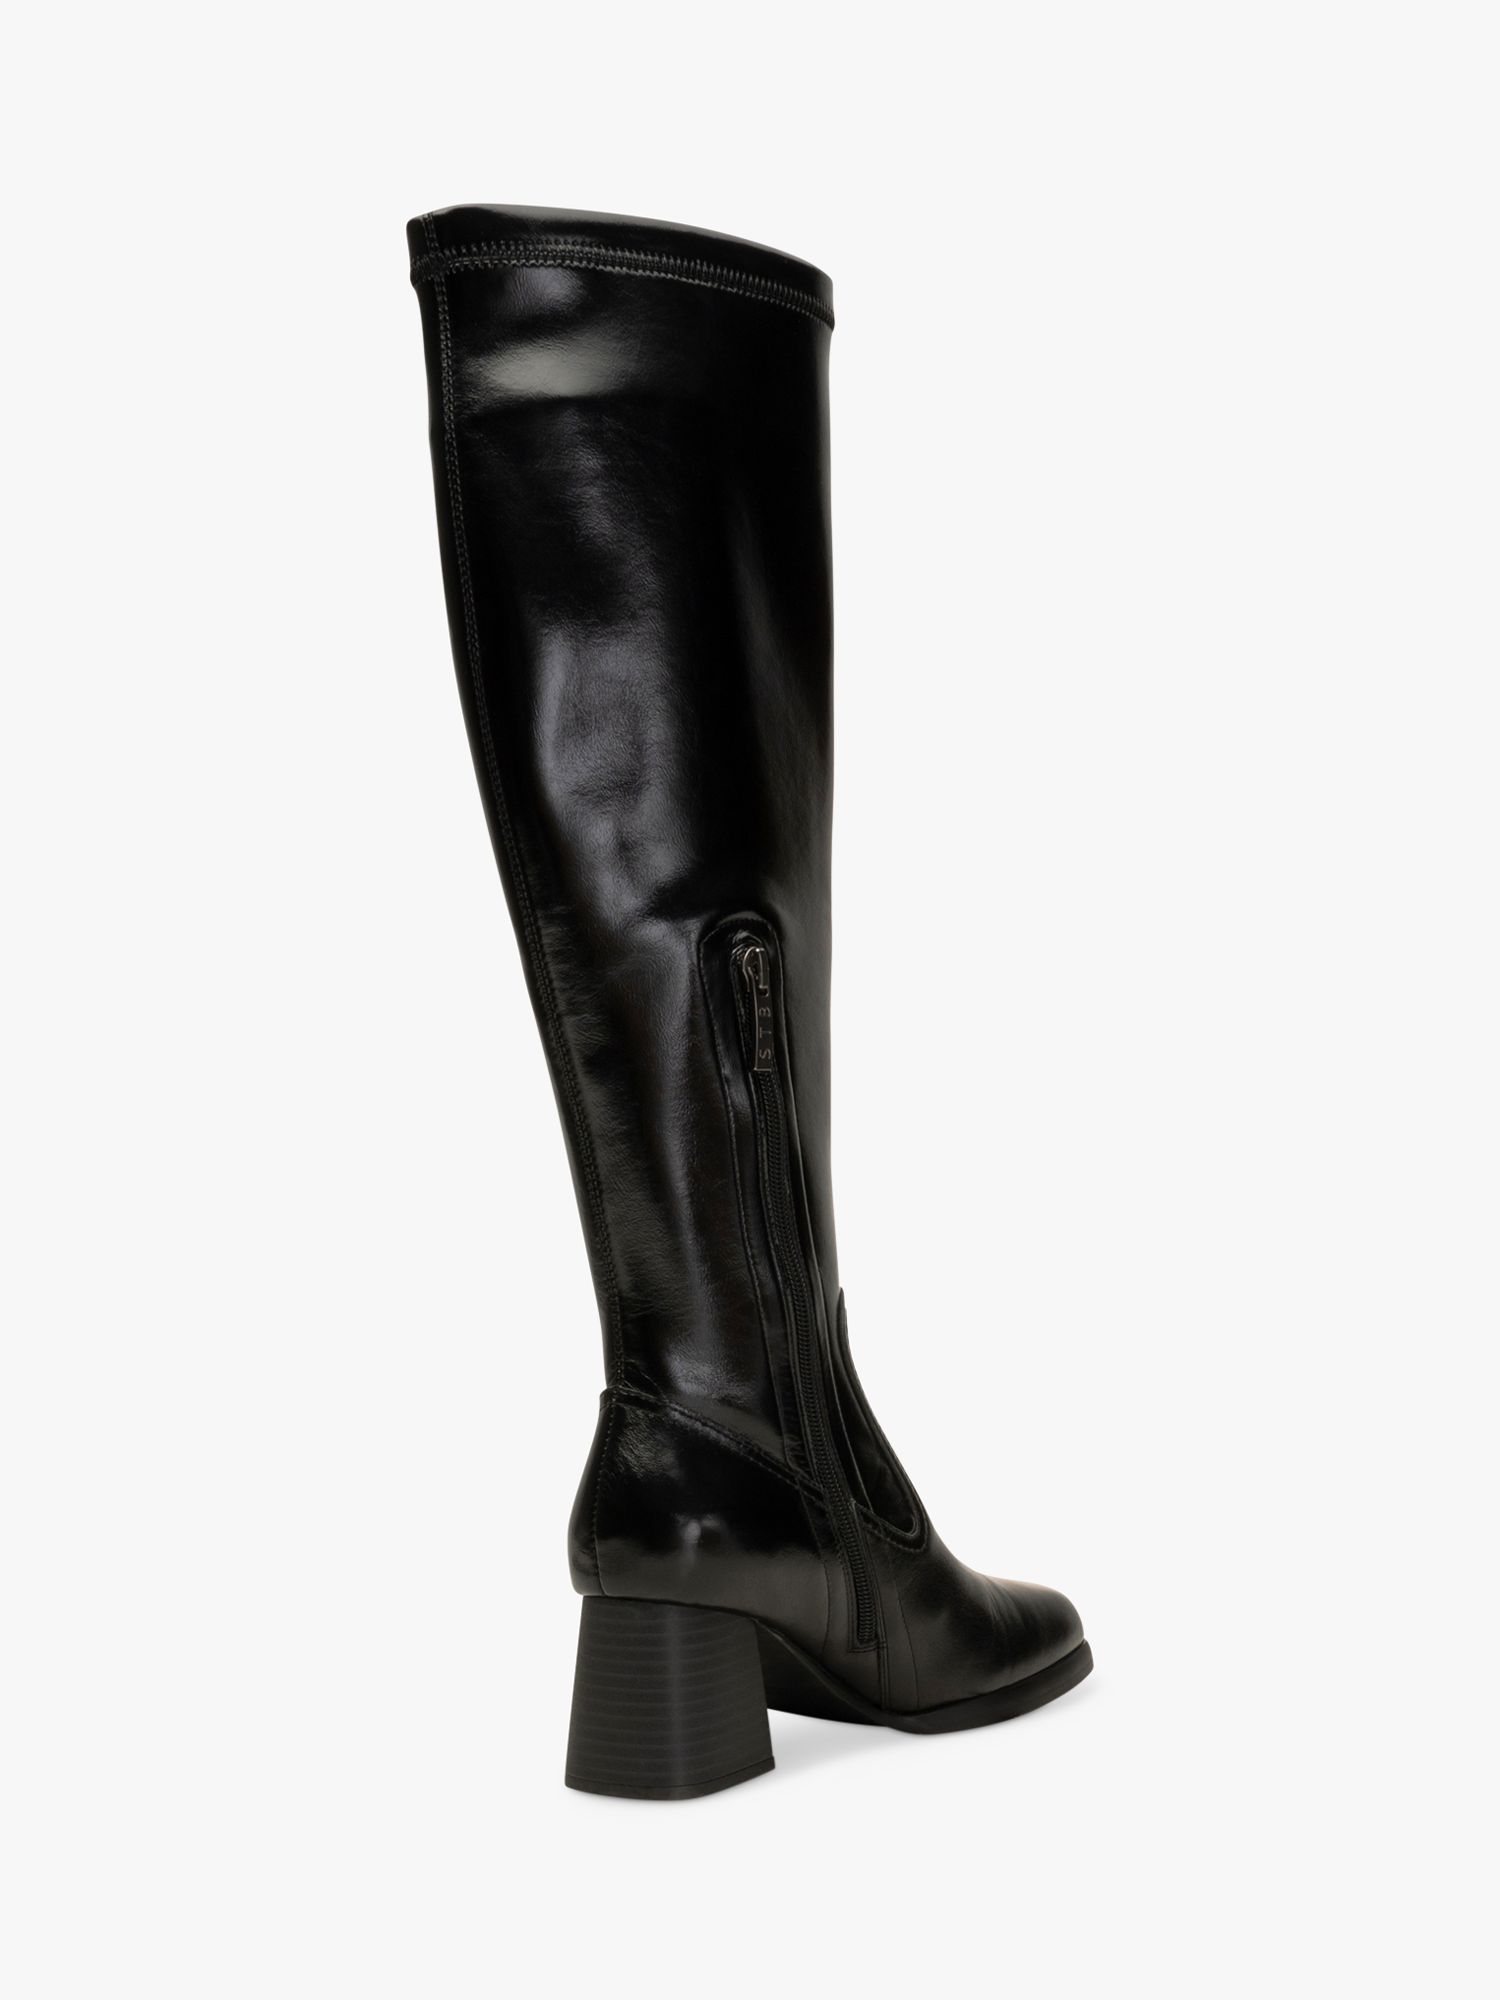 SHOE THE BEAR Lila Leather Knee Boots, Black at John Lewis & Partners